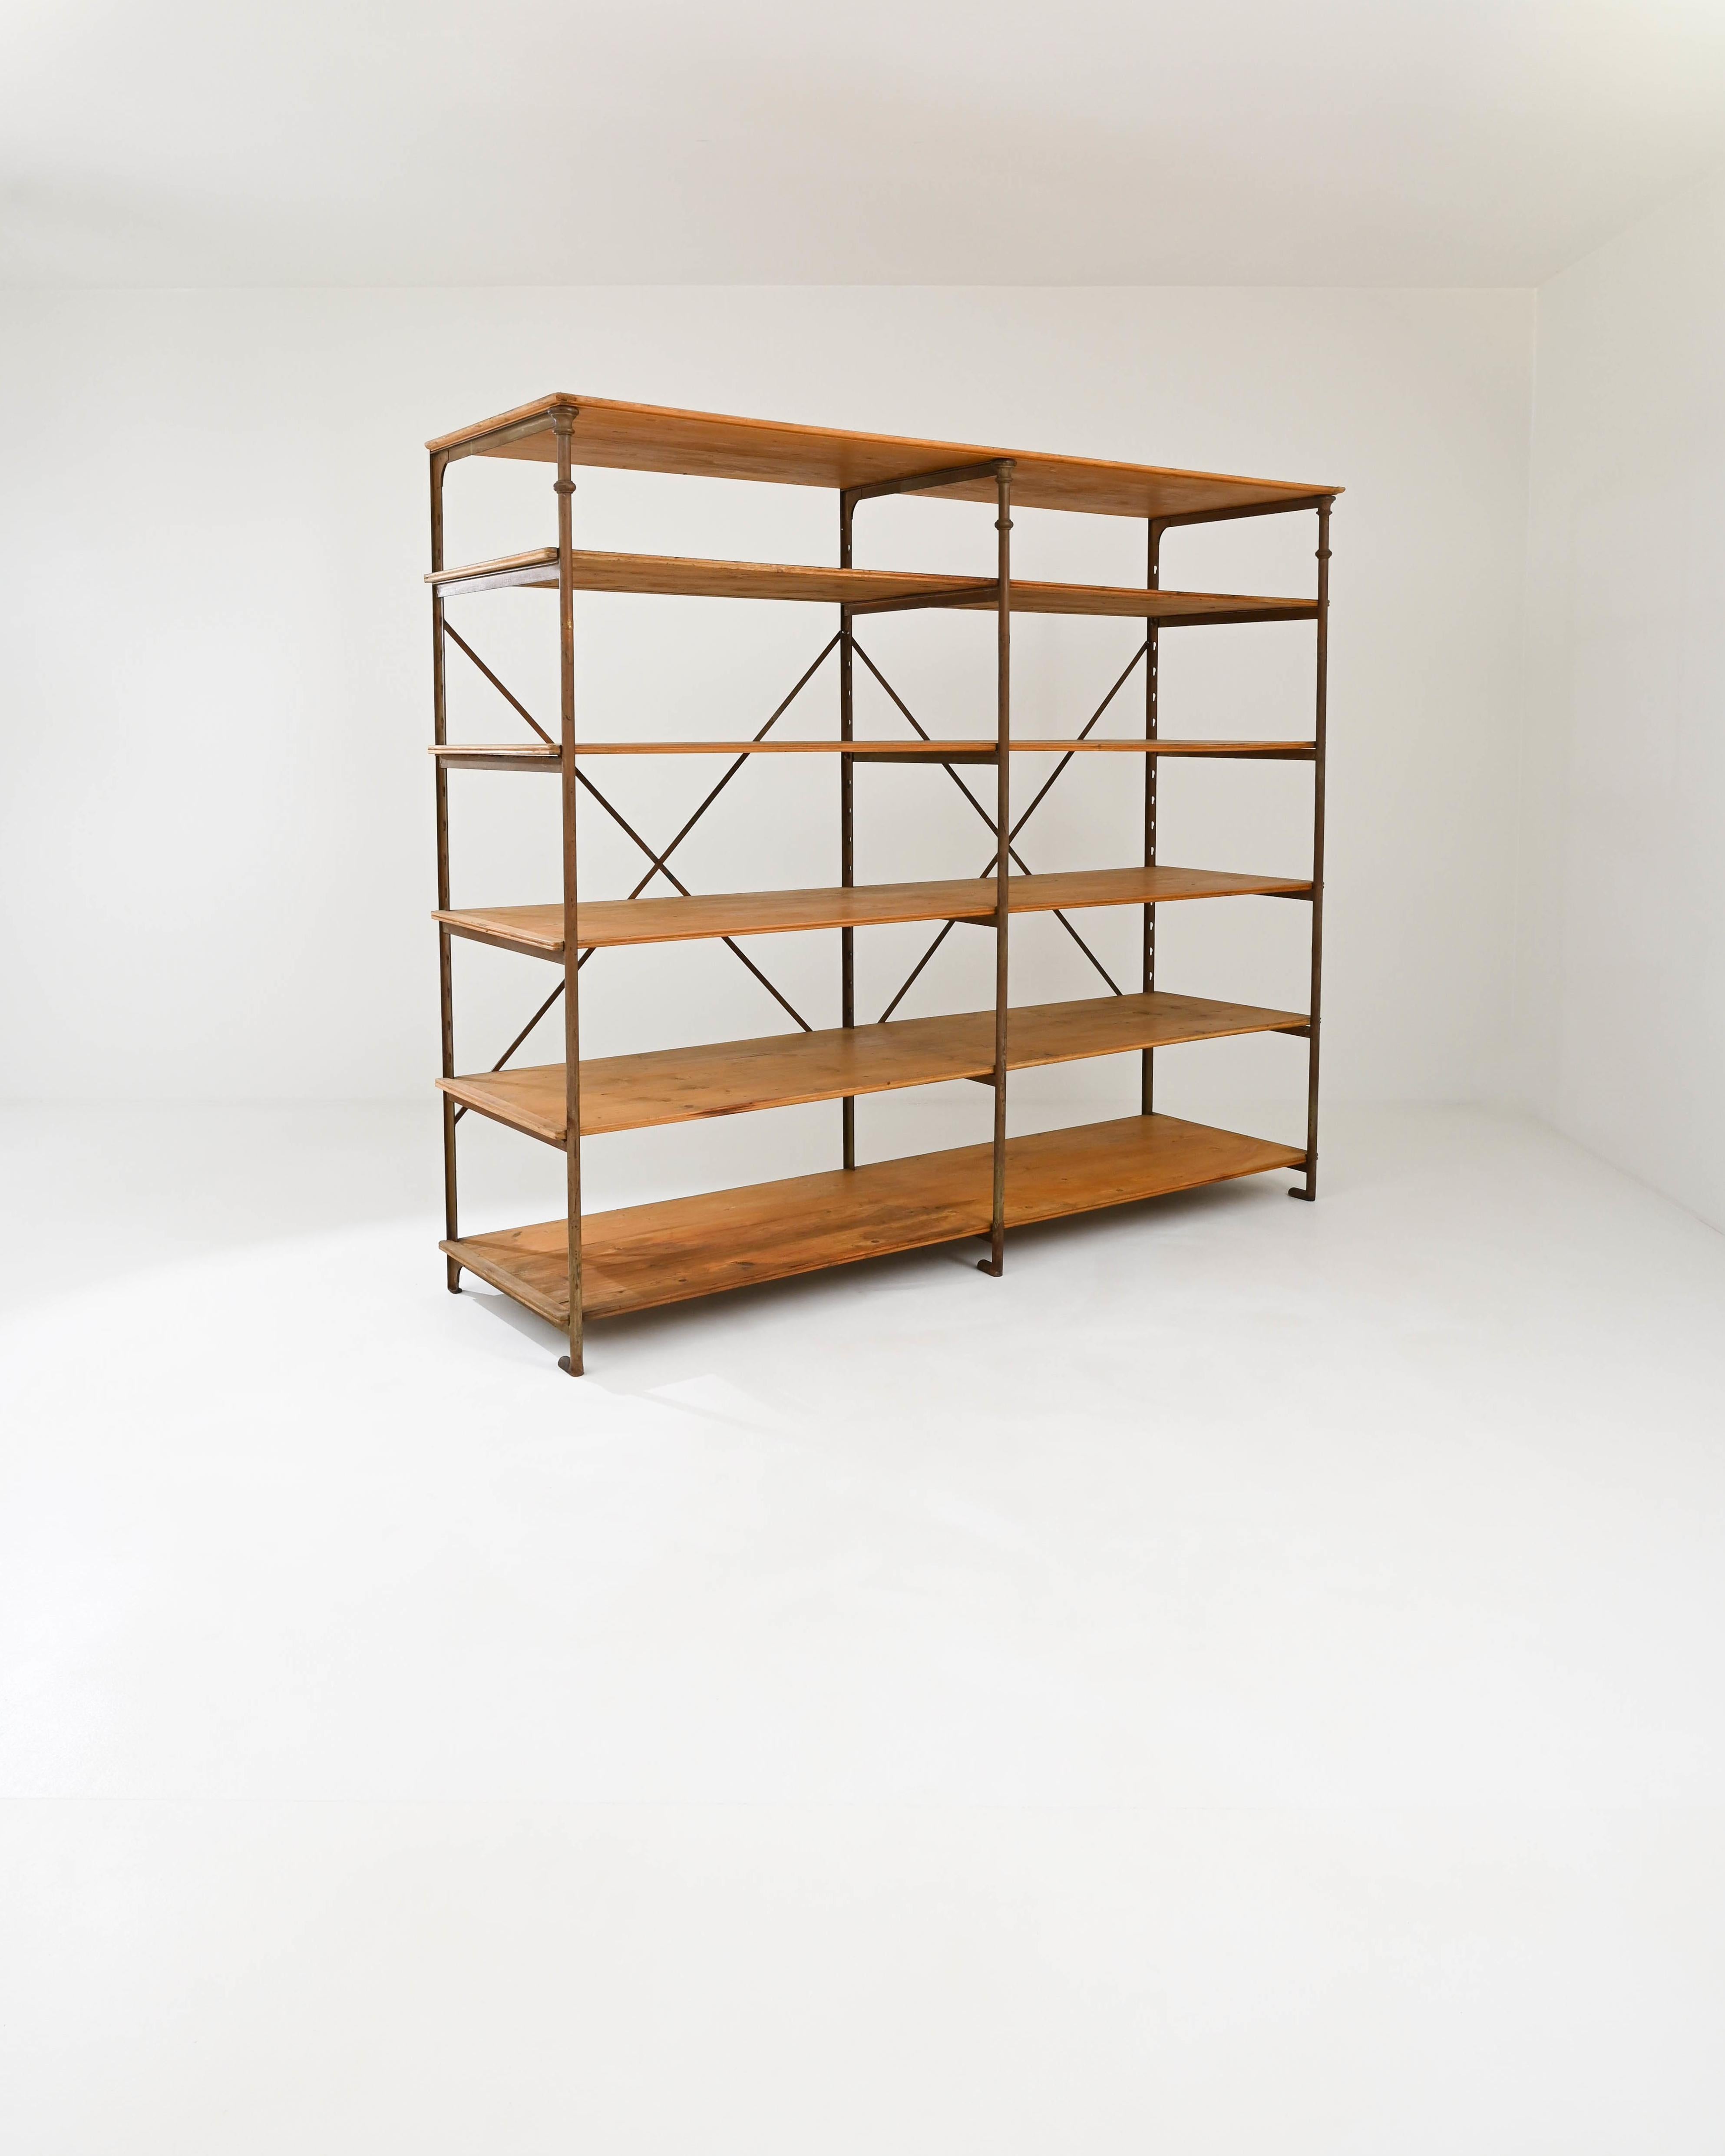 Early 20th Century Turn of the Century Parisian Industrial Shelving by Theodore Scherf